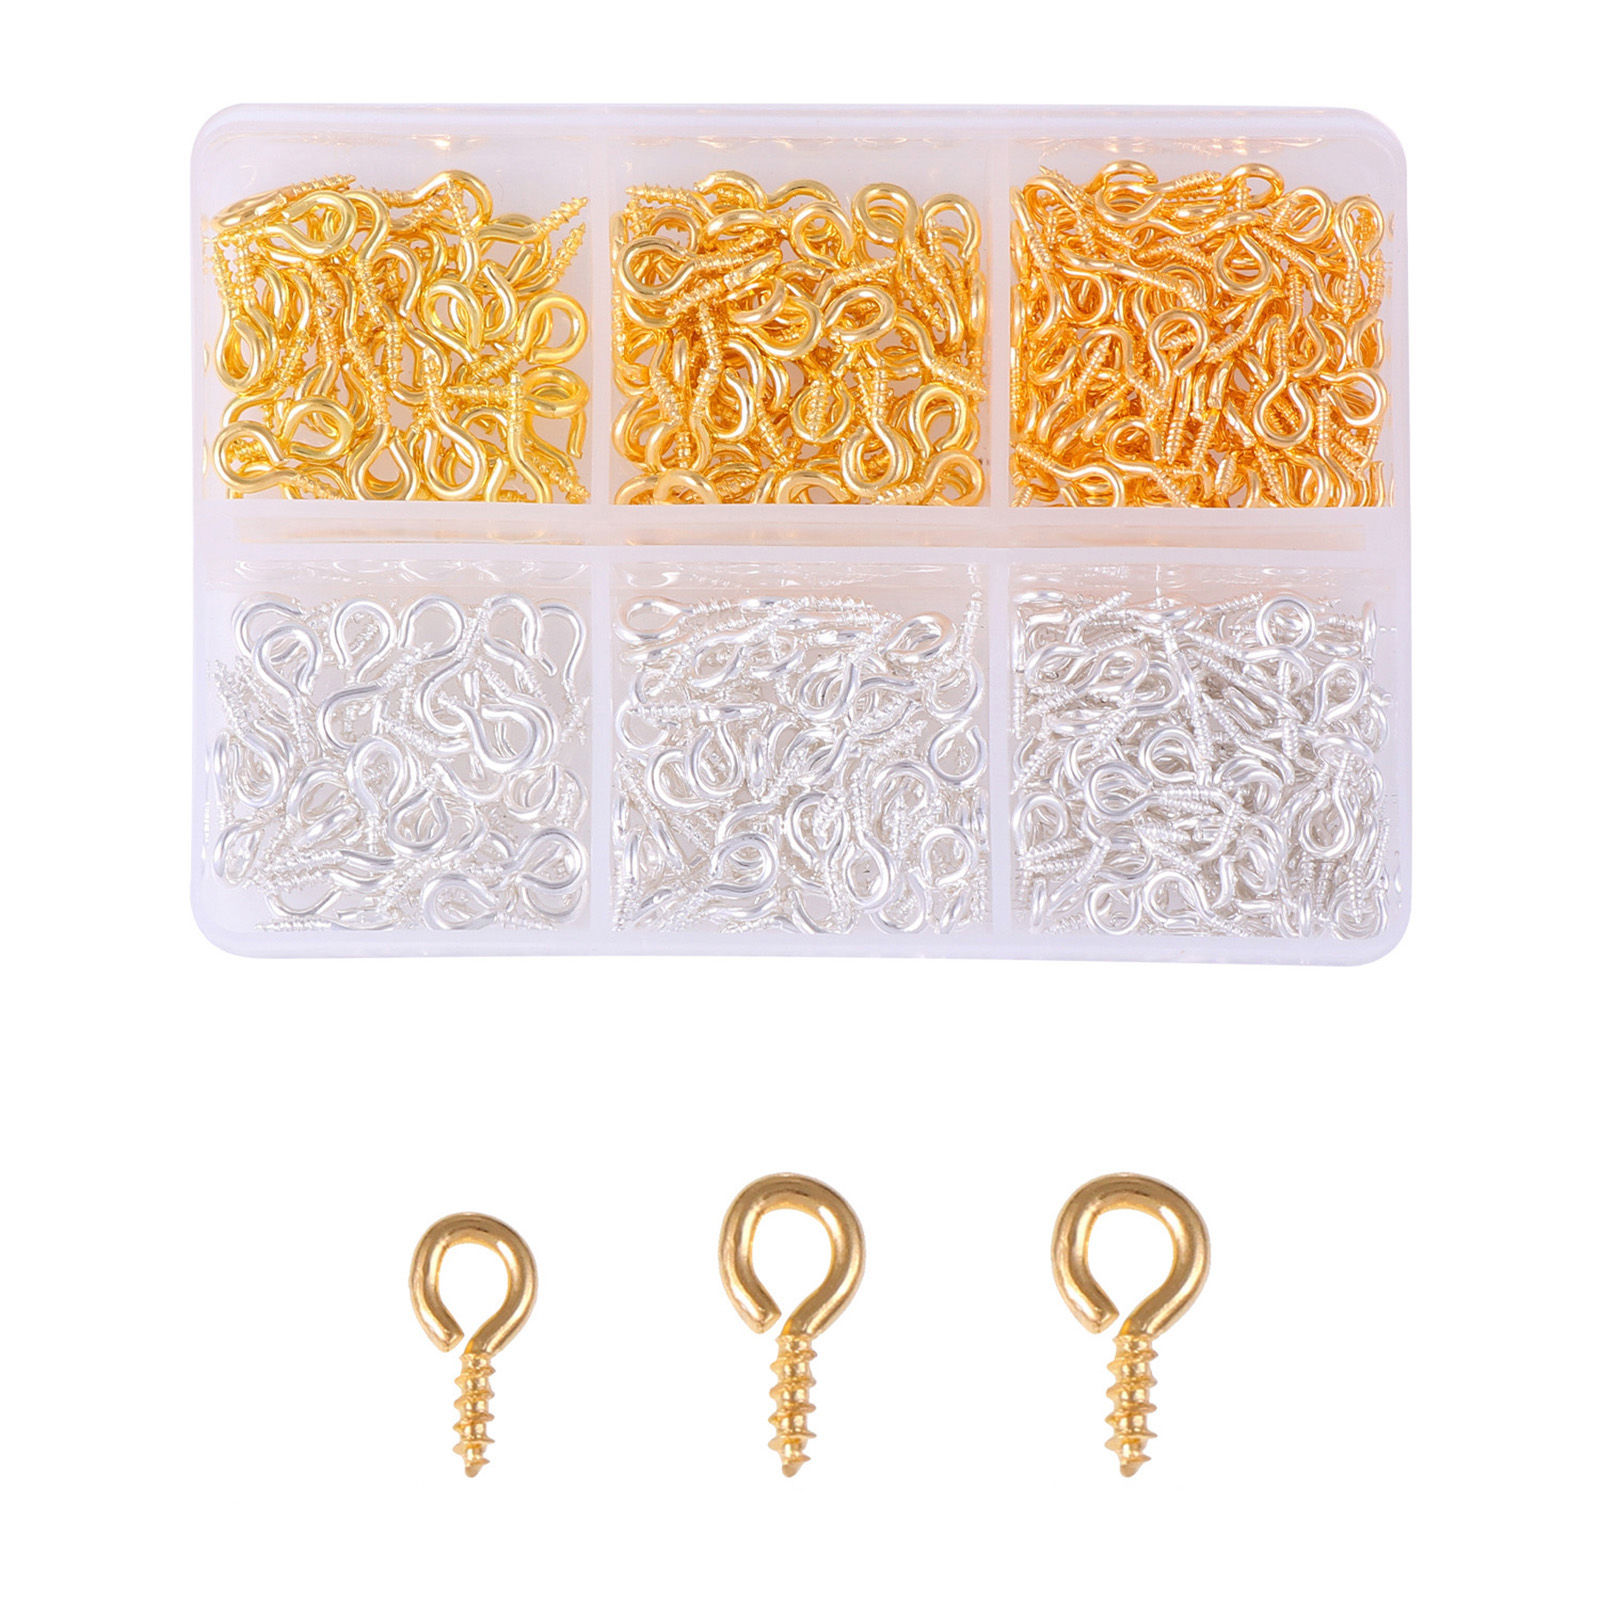 Picture of Iron Based Alloy Screw Eyes Bails Top Drilled Findings Gold Plated & Silver Plated 8cm x 5.5cm, 1 Set ( 400 PCs/Box)